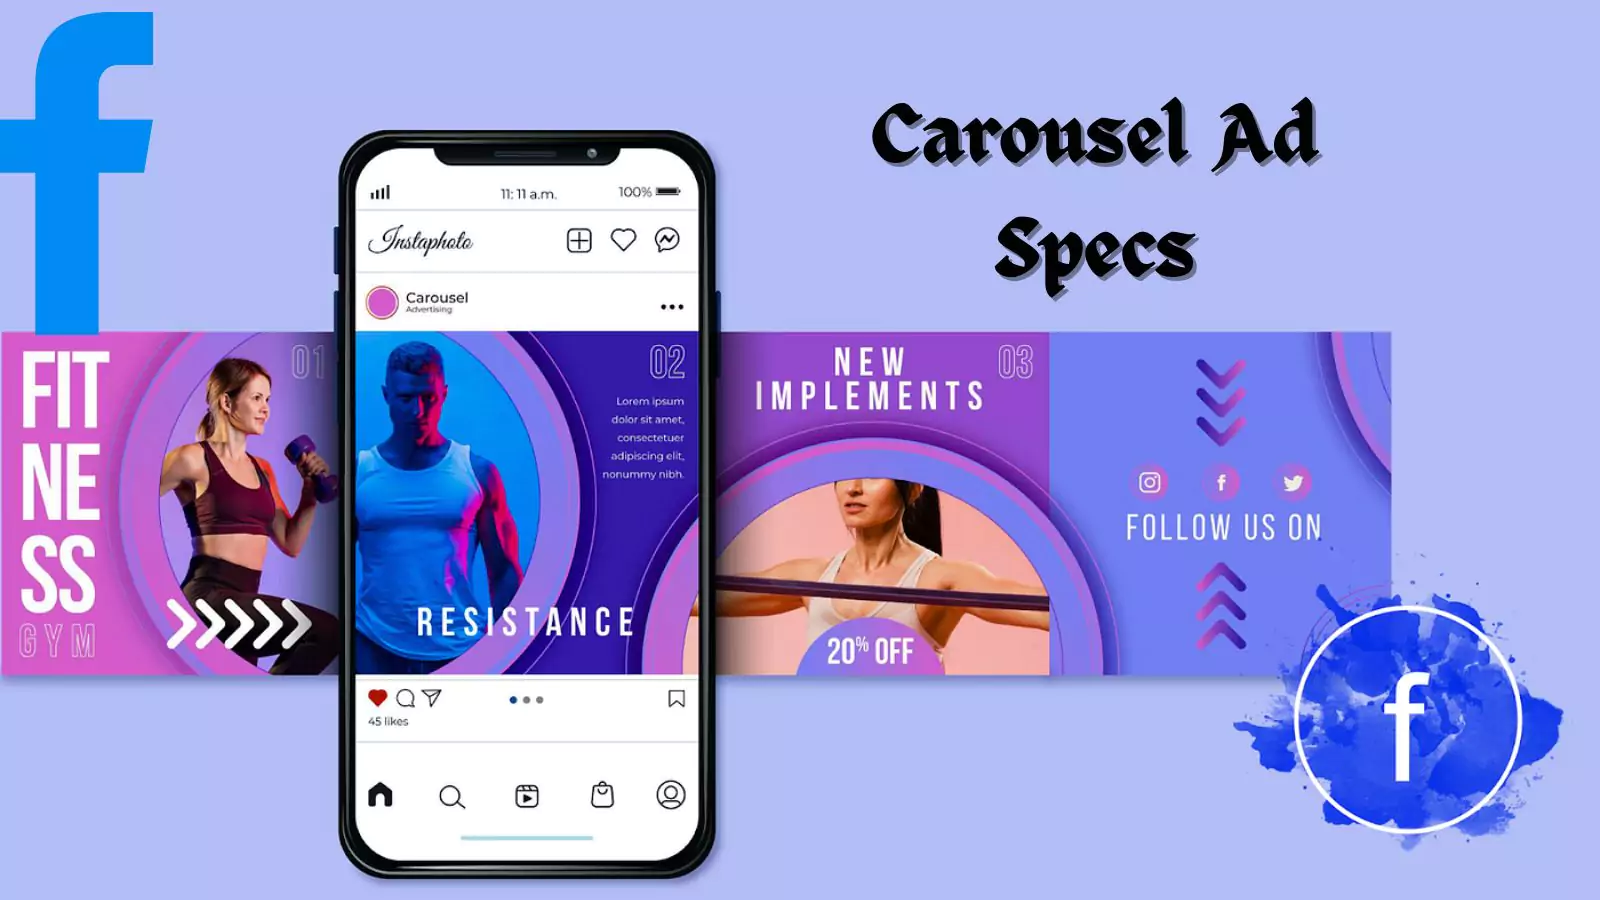 about-facebook-carousel-ad-specs